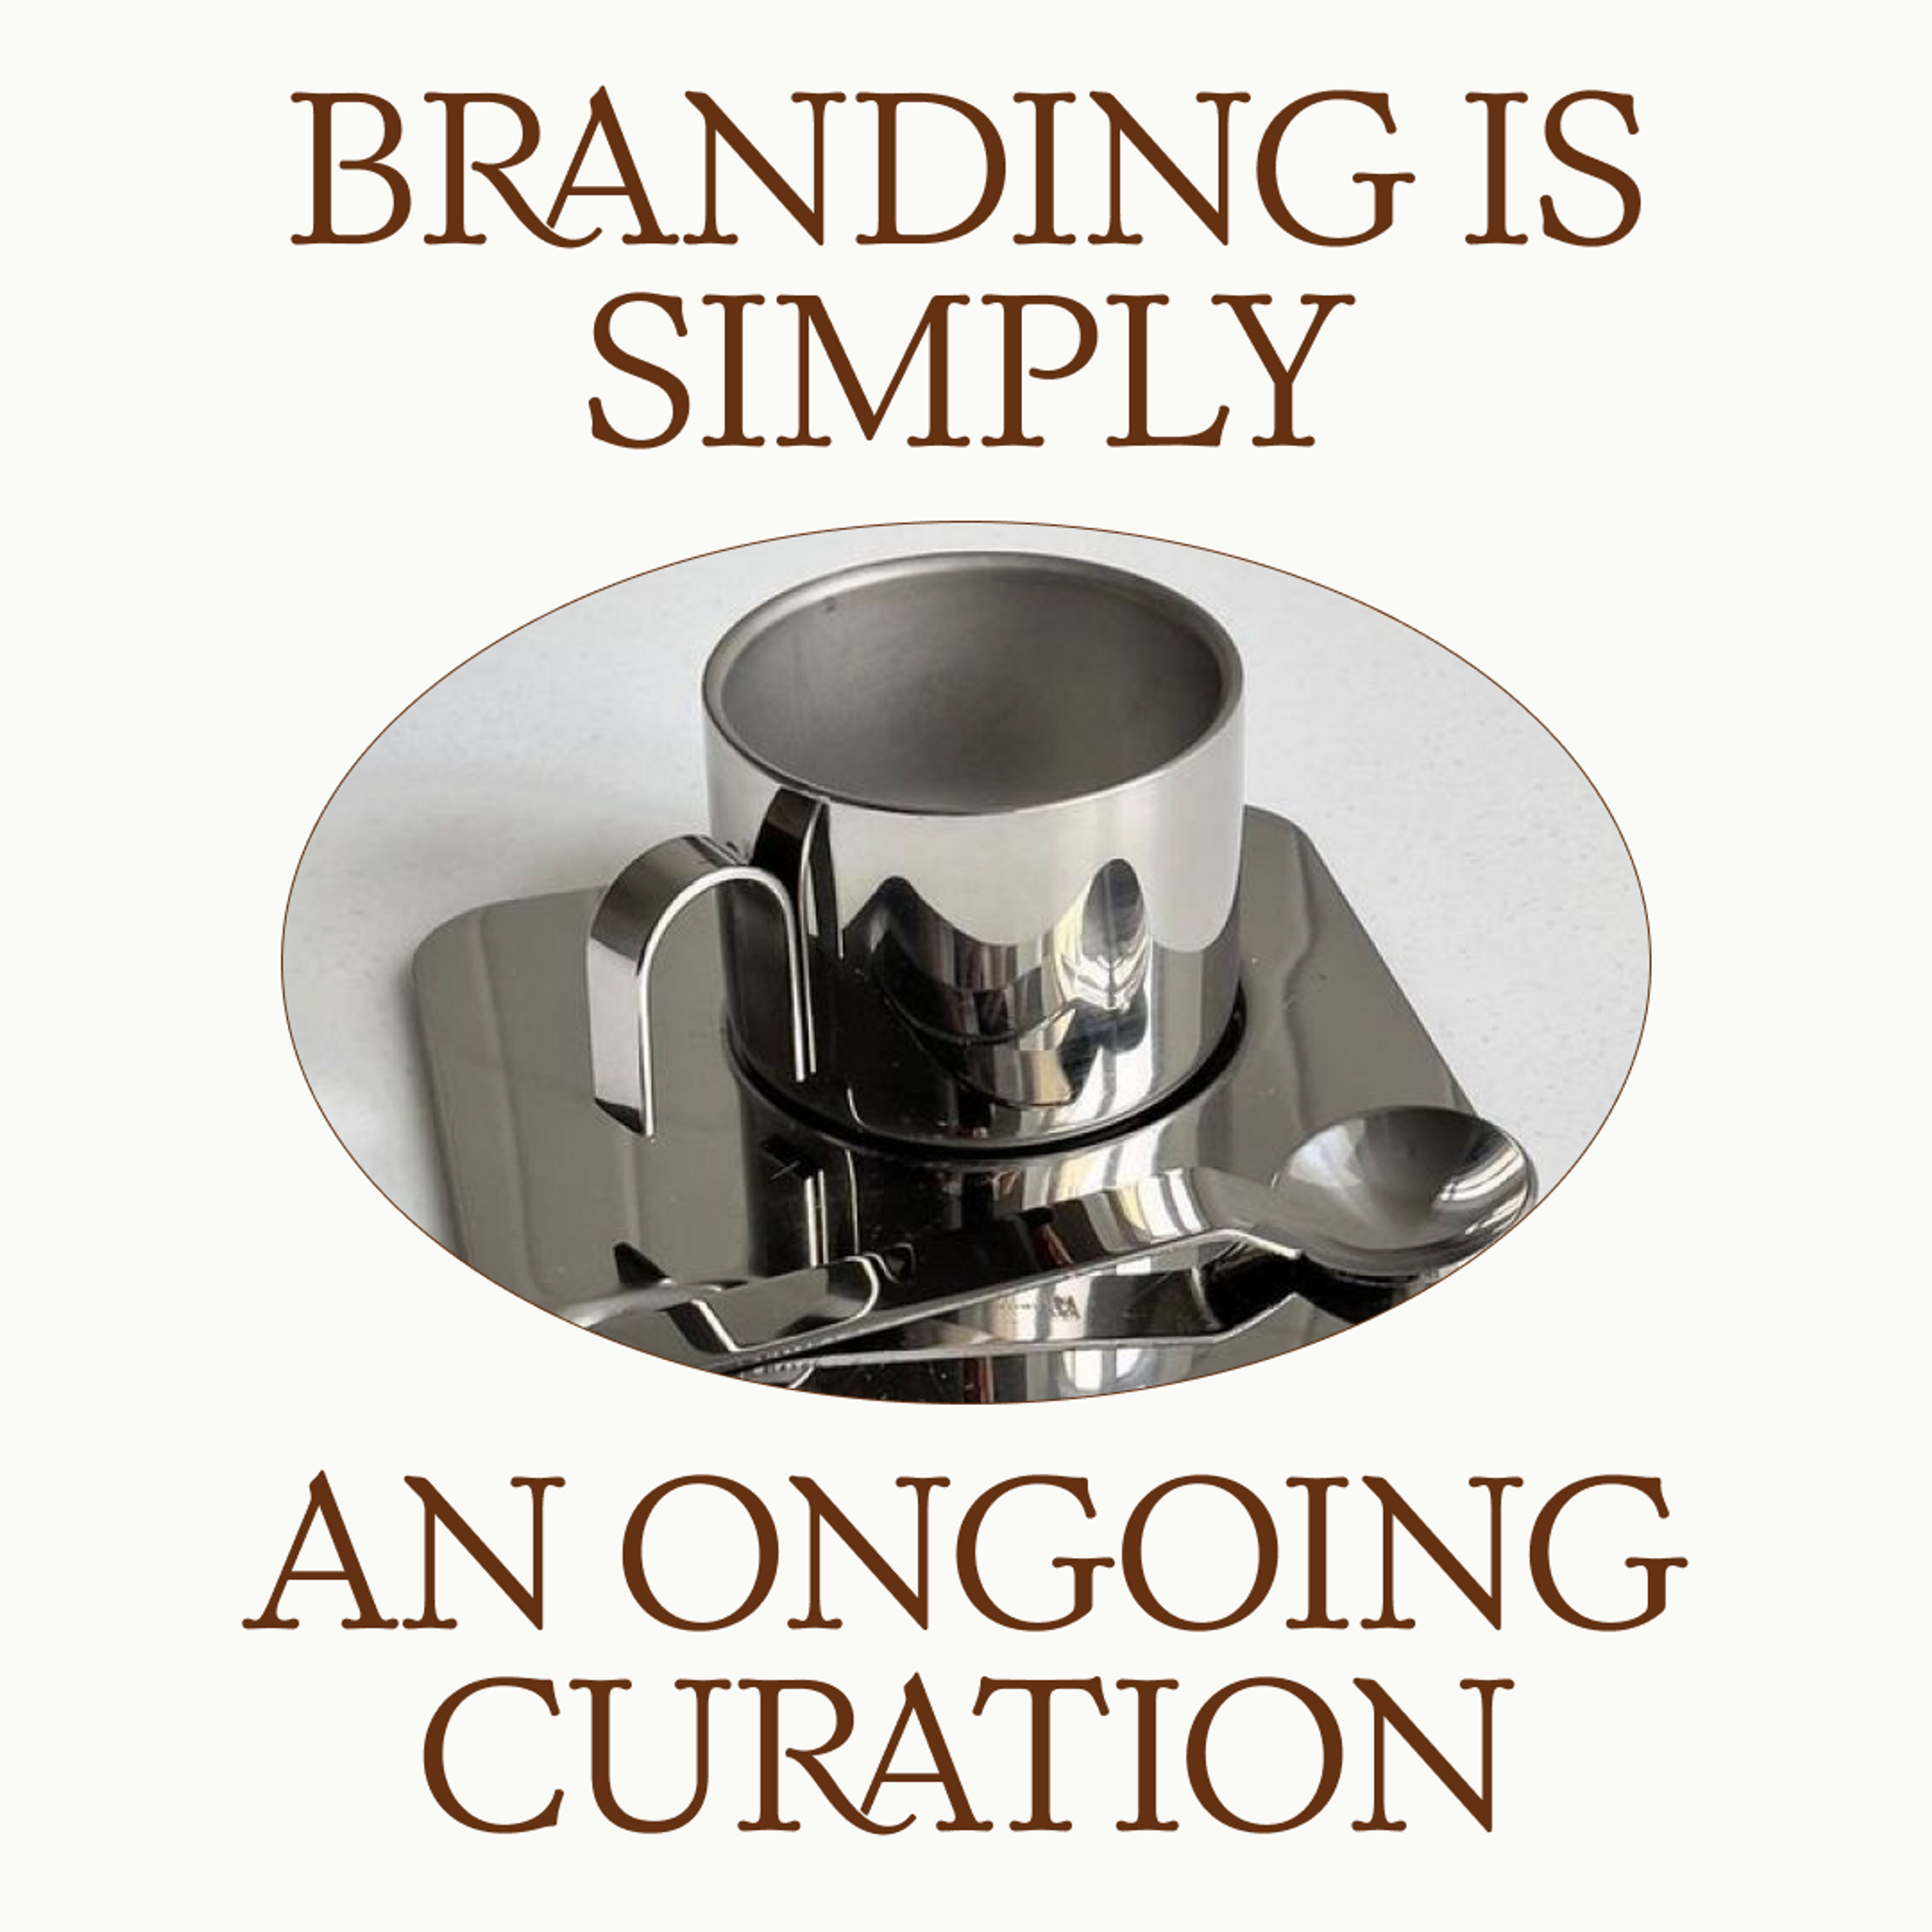 Branding is simply an ongoing curation Instagram cover